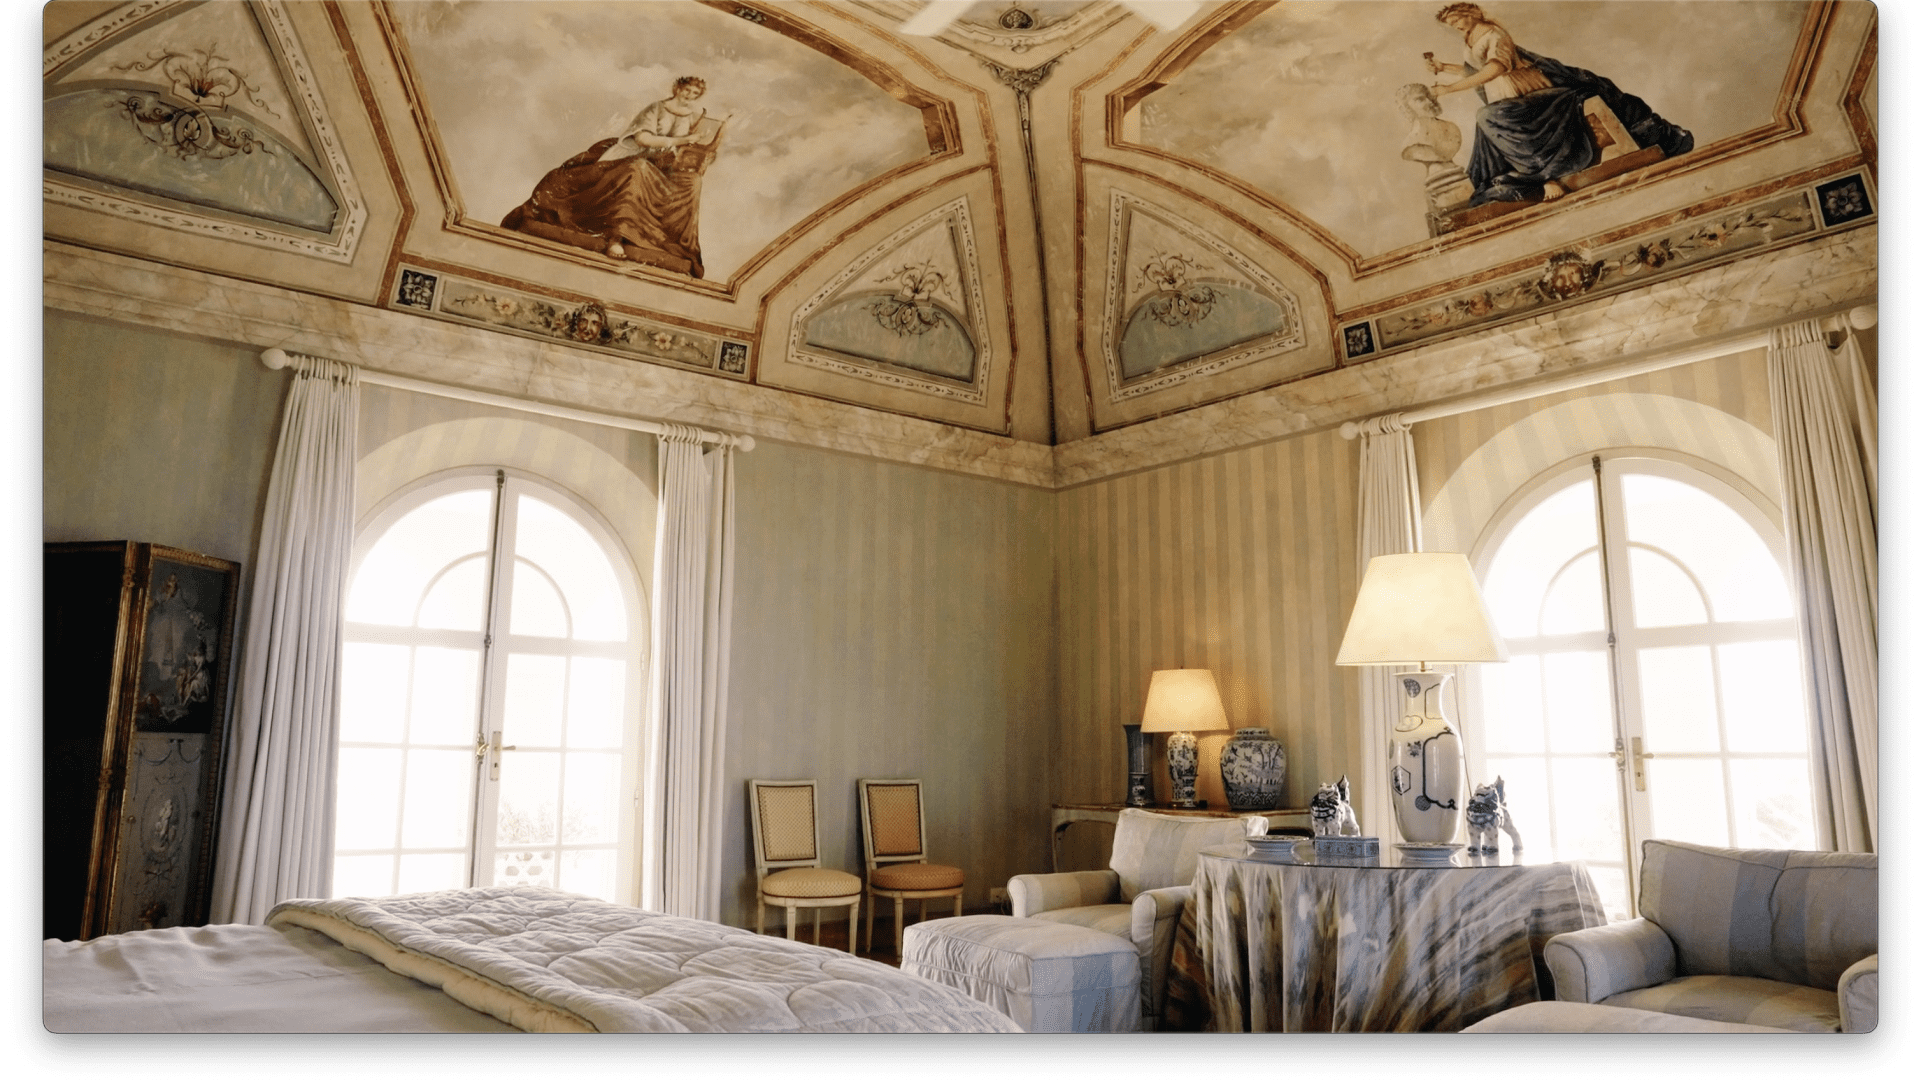 The palatial mood and domed ceiling inside one of the main villa's nine bedrooms.